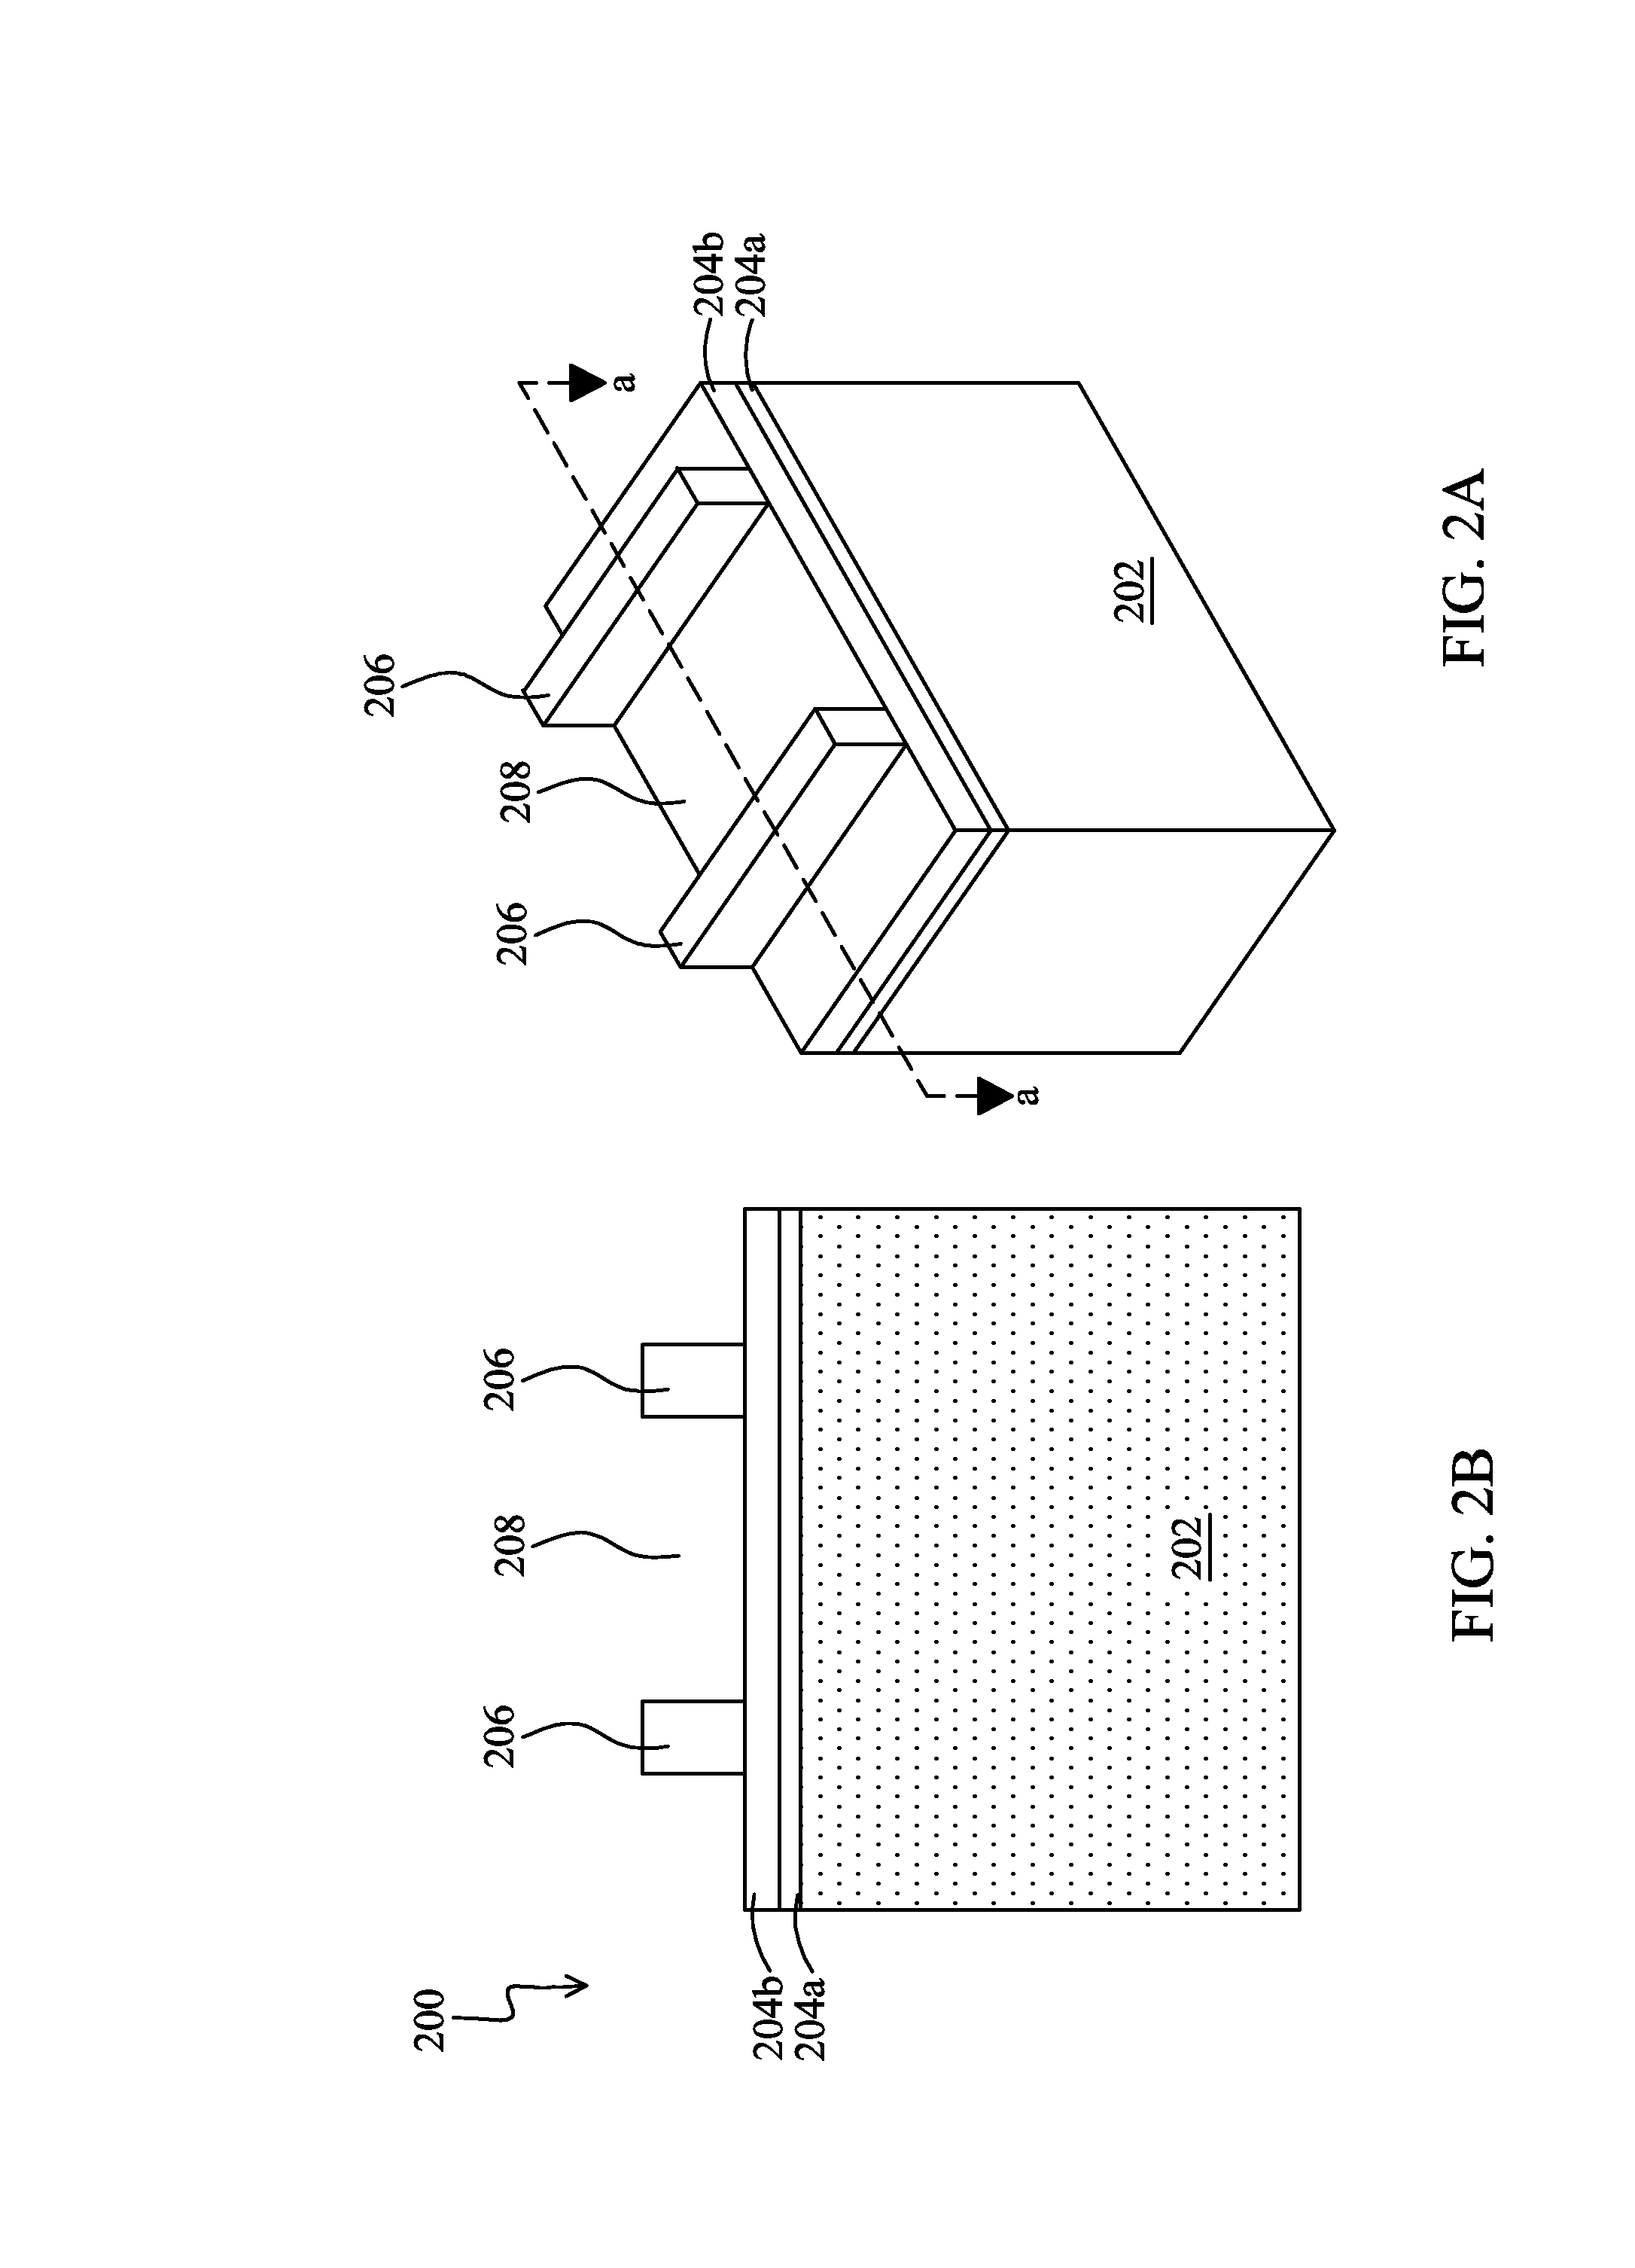 Finfet and method of fabricating the same